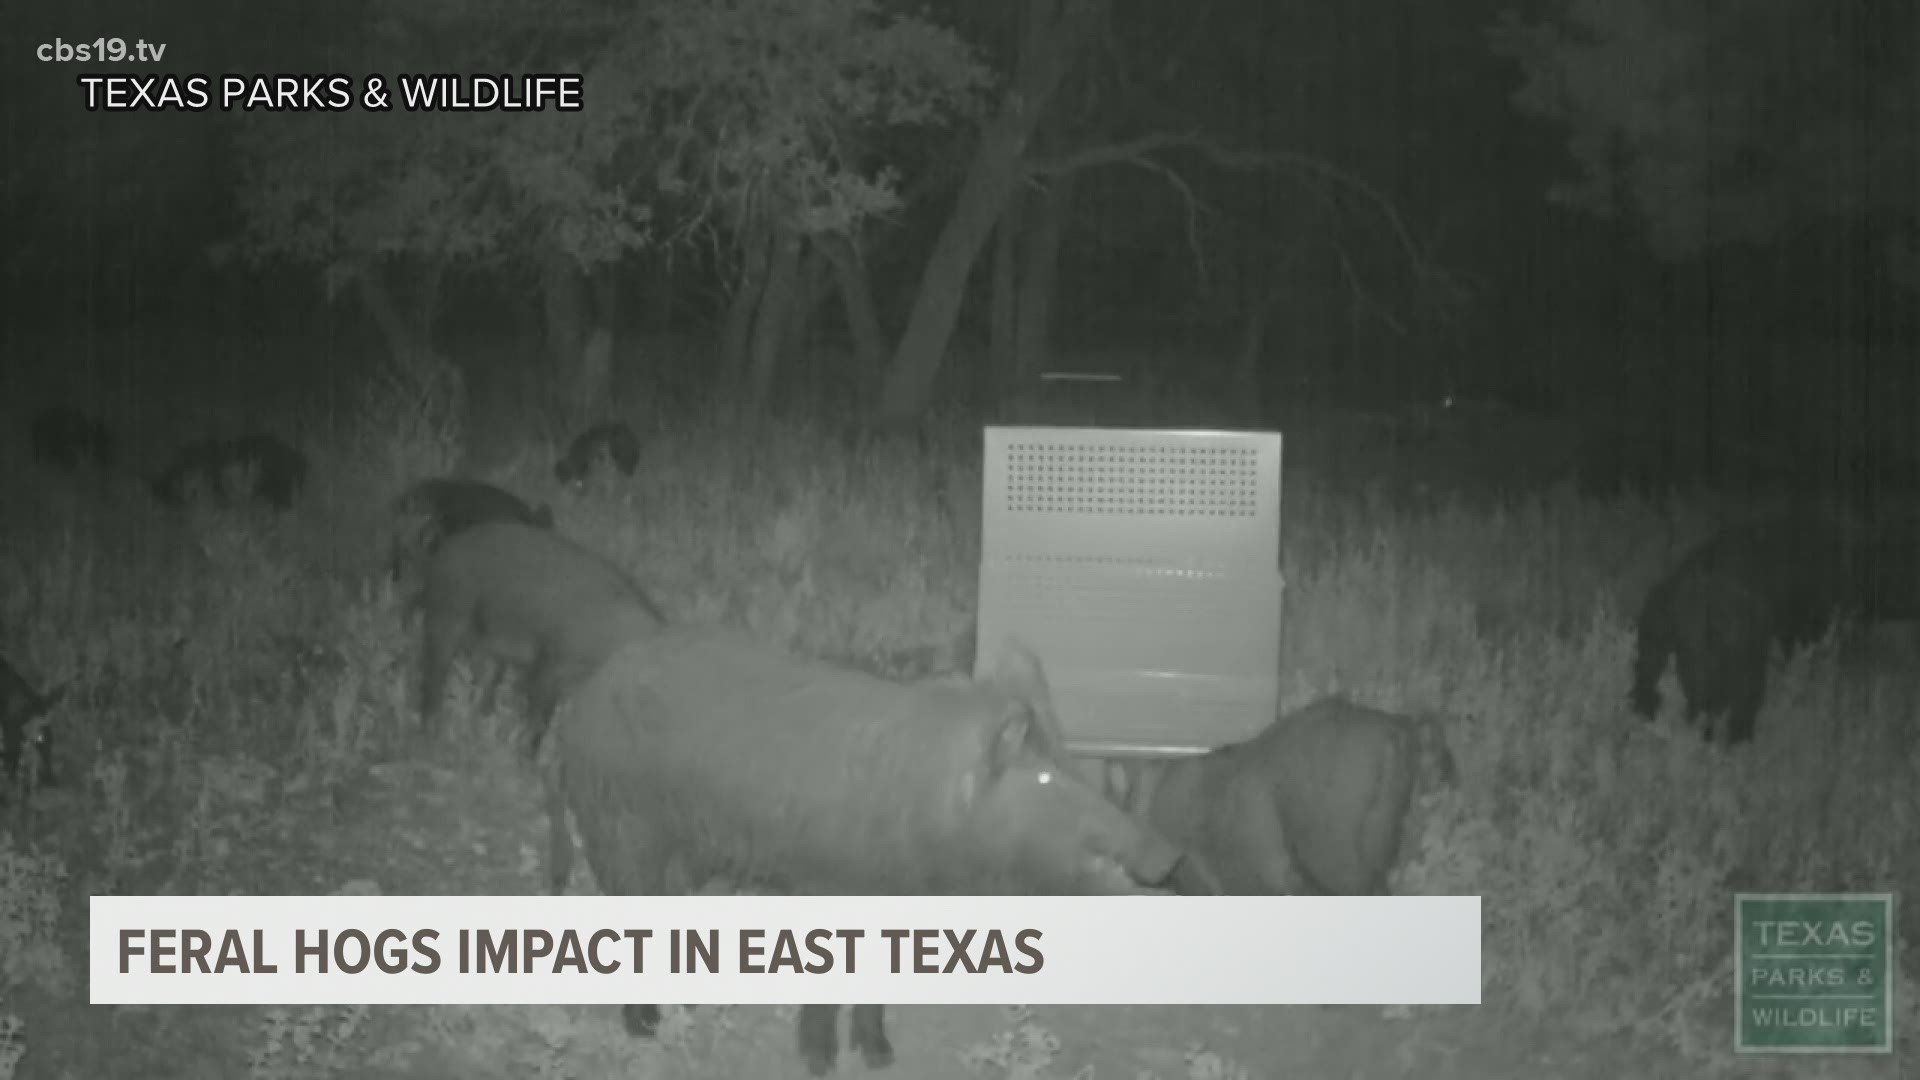 The Texas Wildlife Services Program removed 36,000 feral hogs last year.